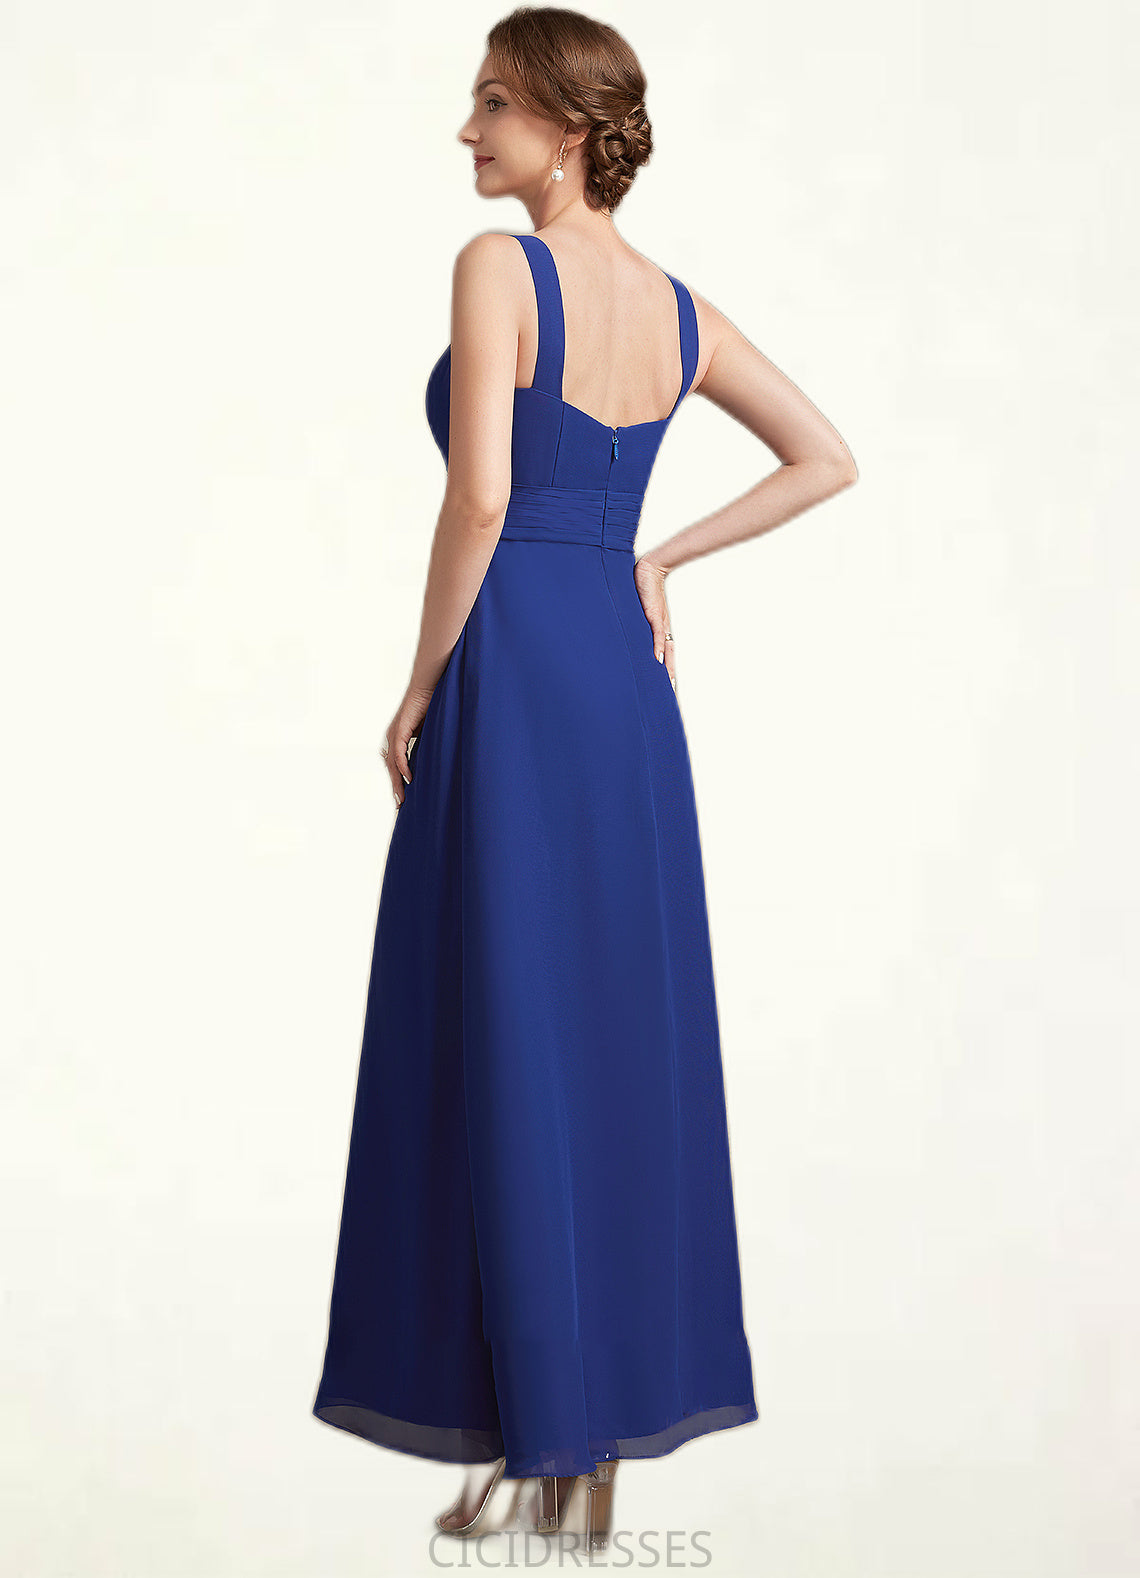 Olive A-Line Square Neckline Ankle-Length Chiffon Mother of the Bride Dress With Ruffle CIC8126P0014982